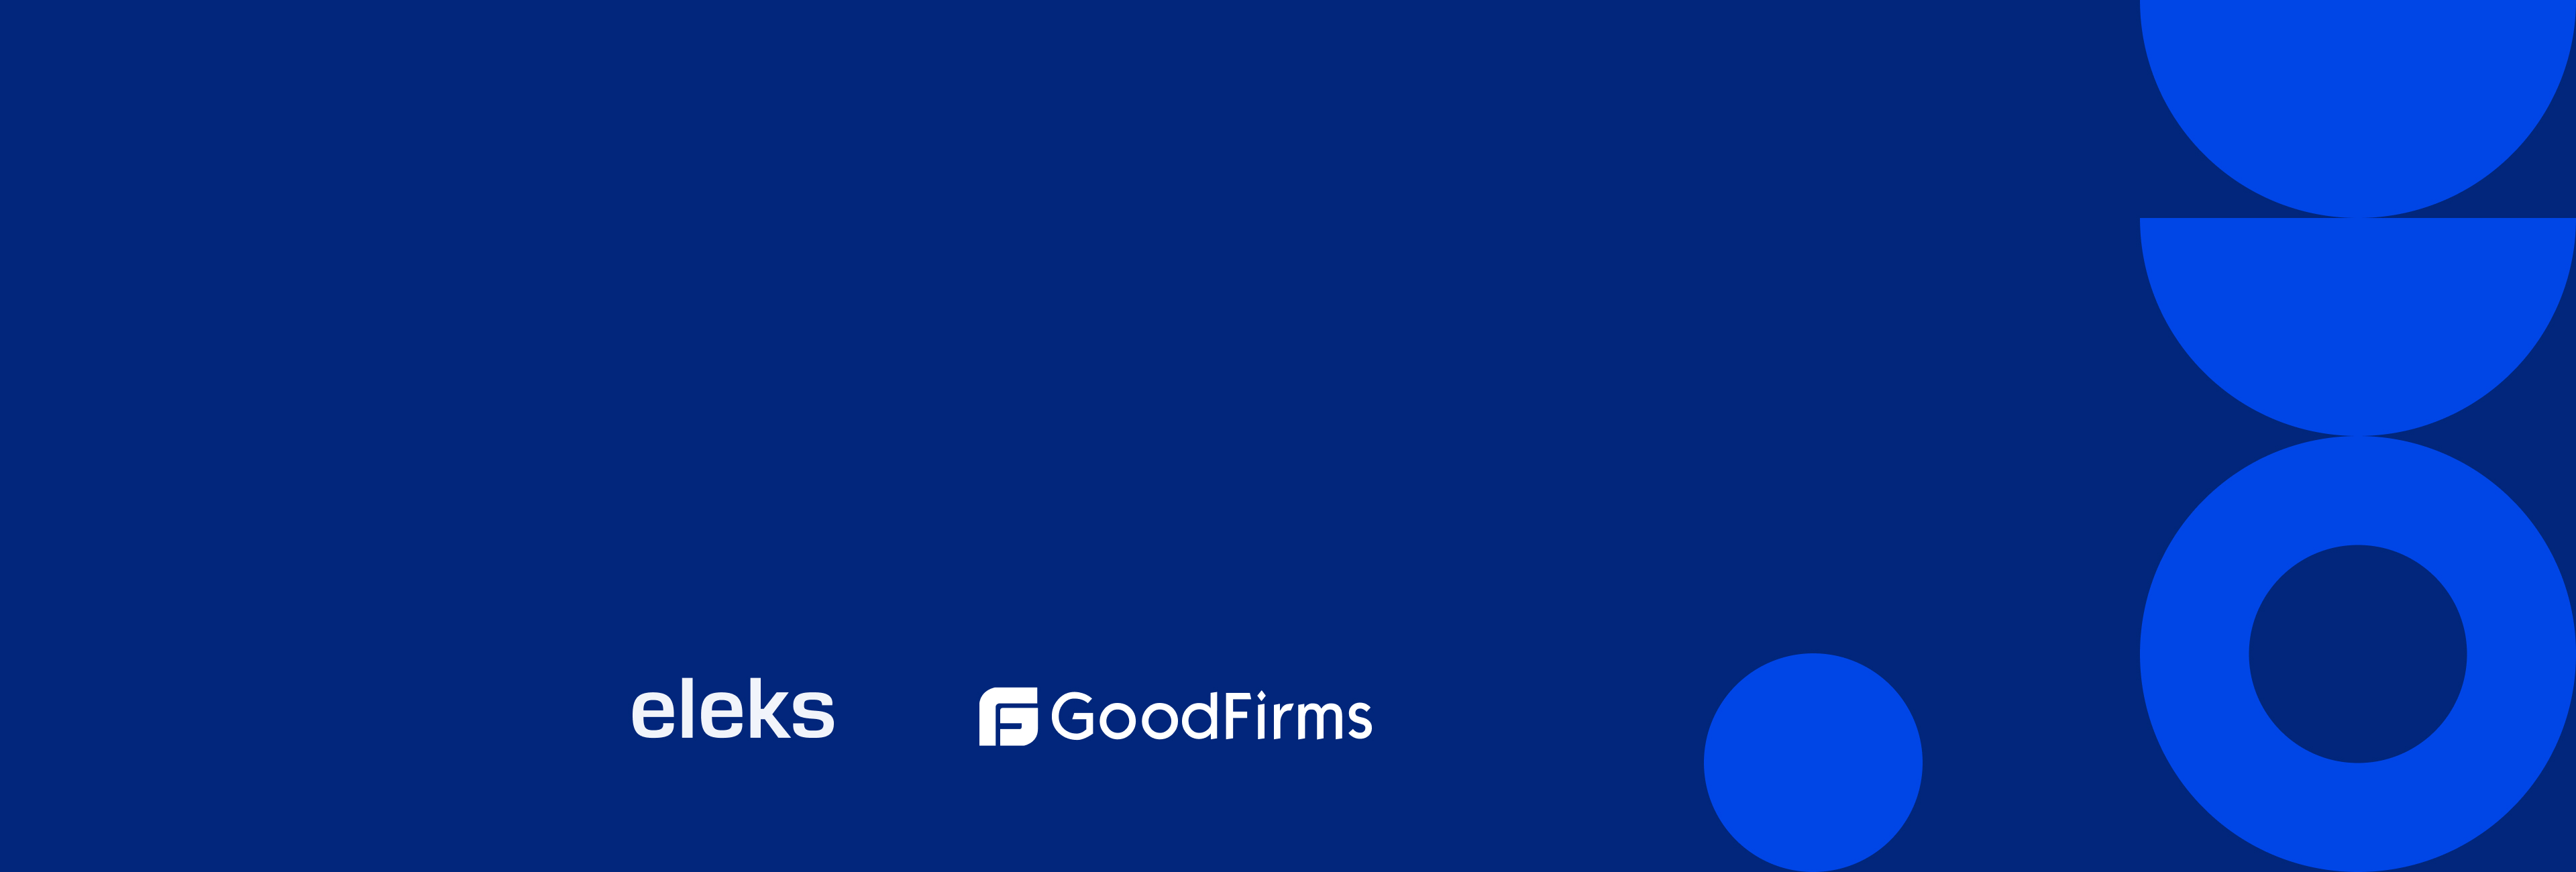 3840x1300_press release GoodFirms